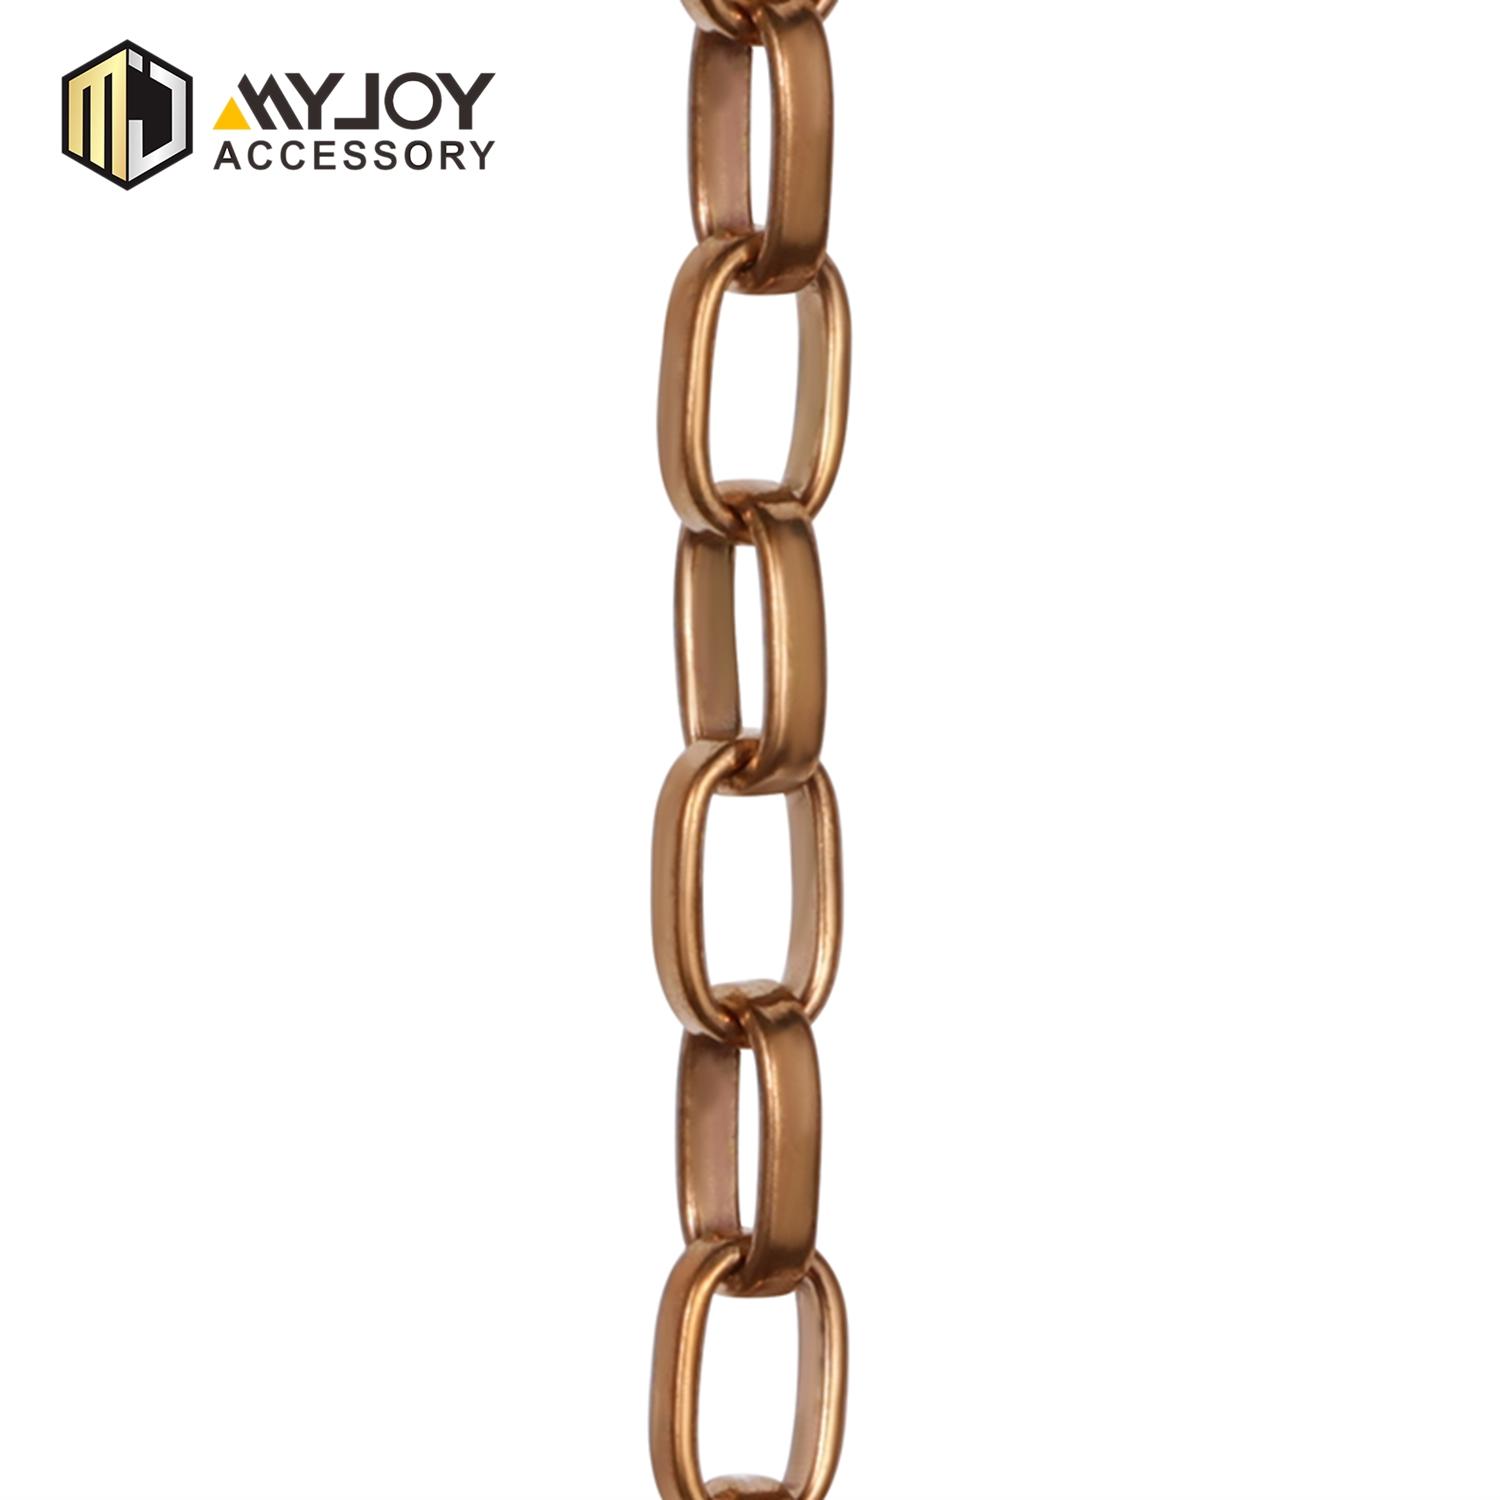 MYJOY Custom strap chain factory for bags